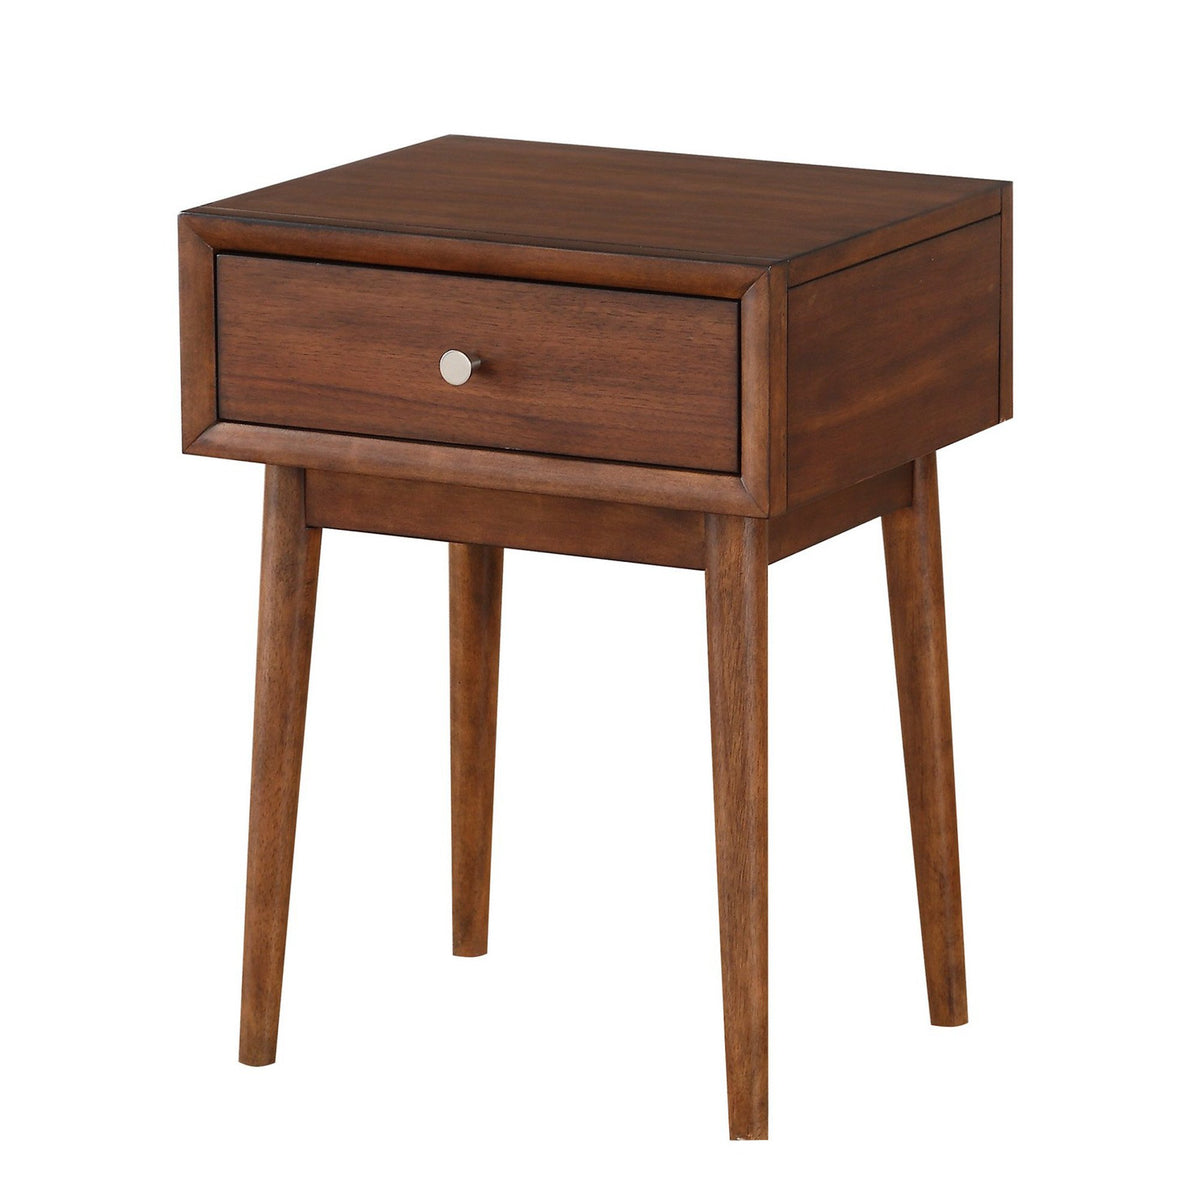 1 Drawer Wooden End Table with Splayed Legs, Walnut Brown - BM220114